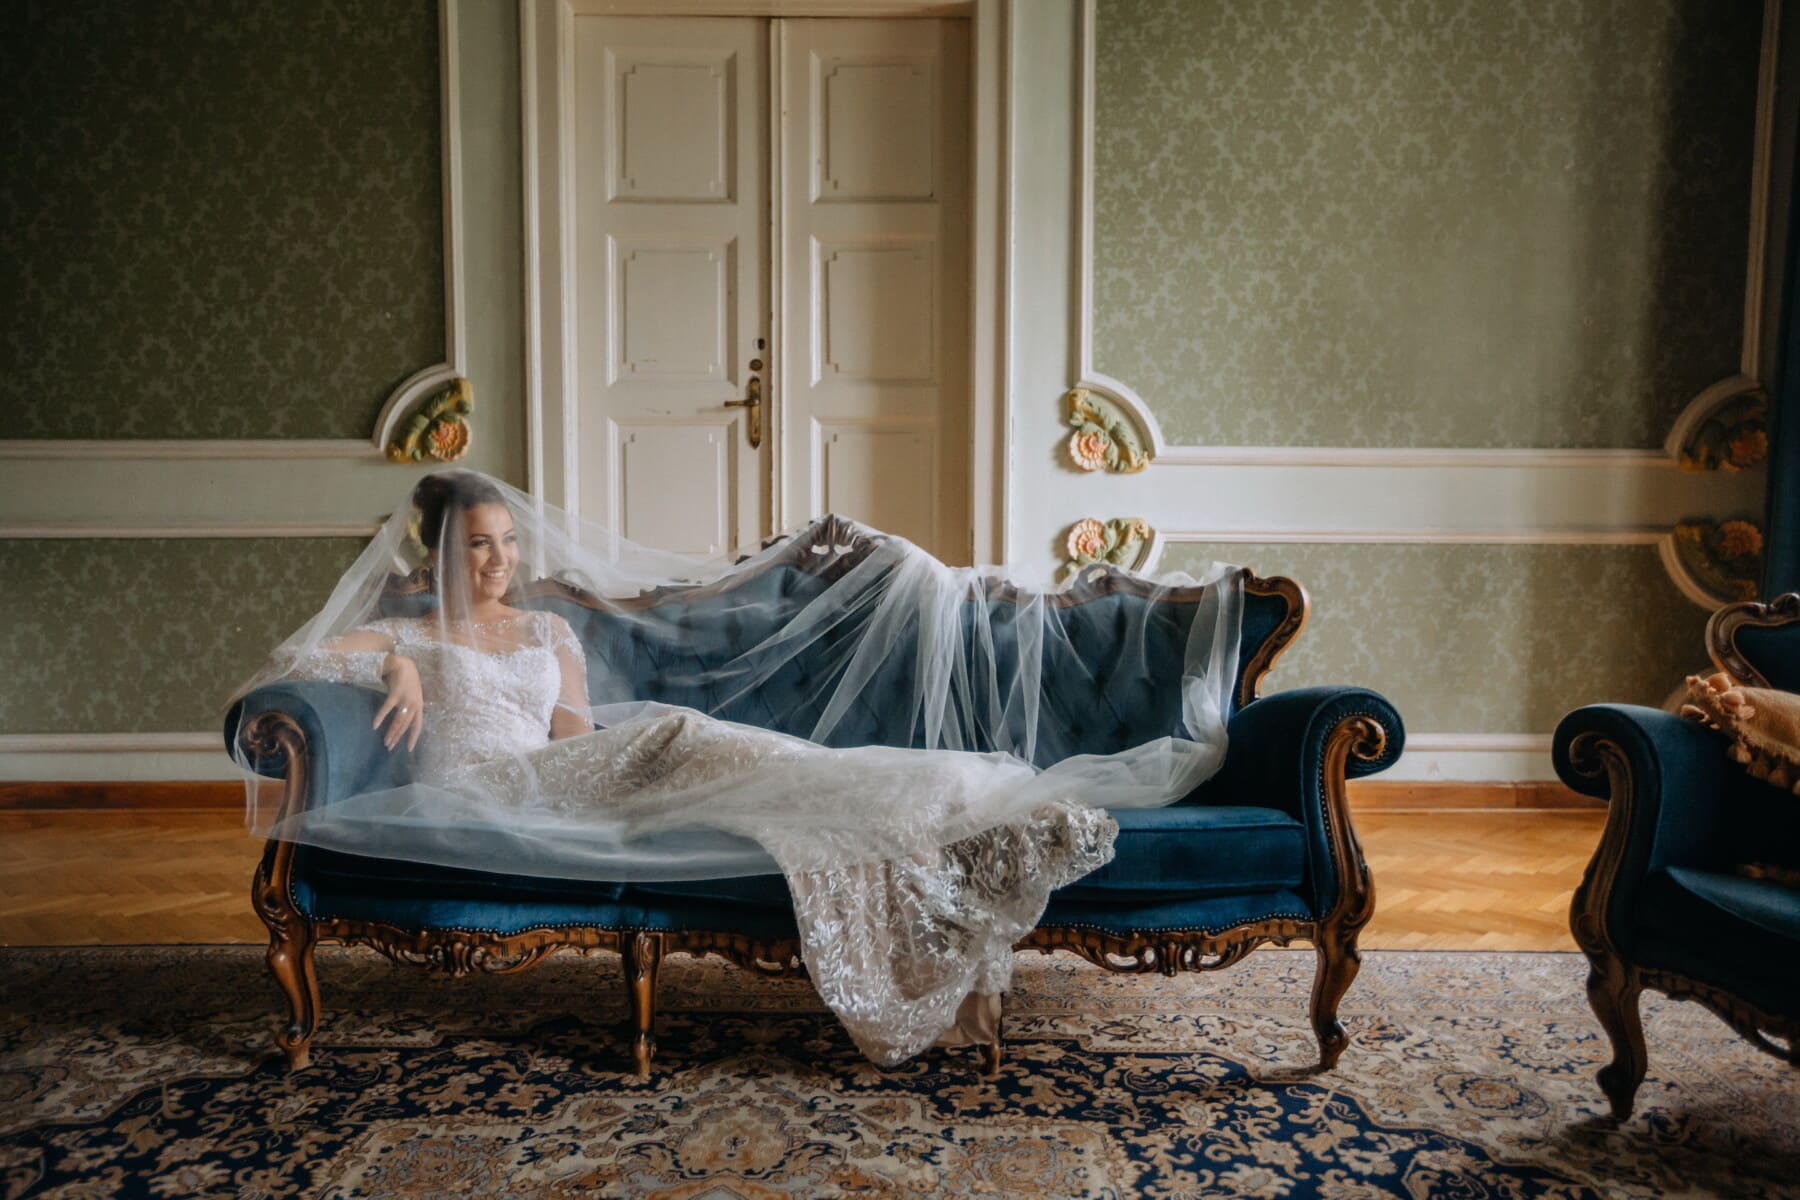 bride, laying, couch, baroque, sofa, lifestyle, fancy, room, interior, home